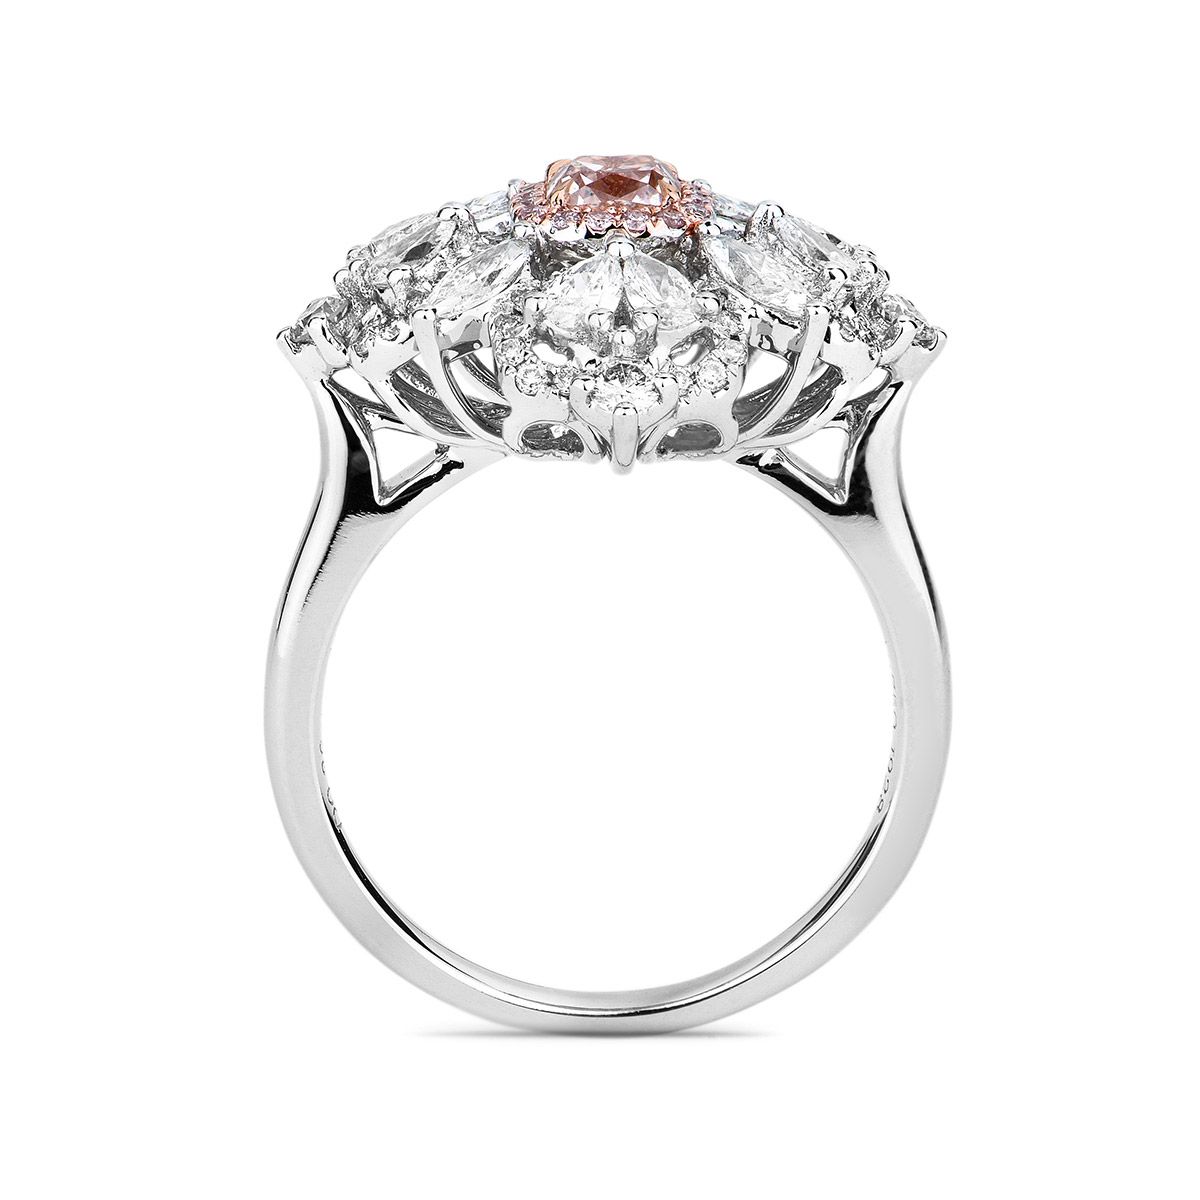 Light Pink Diamond Ring, 0.36 Ct. (1.58 Ct. TW), Radiant shape, GIA Certified, 1203460160